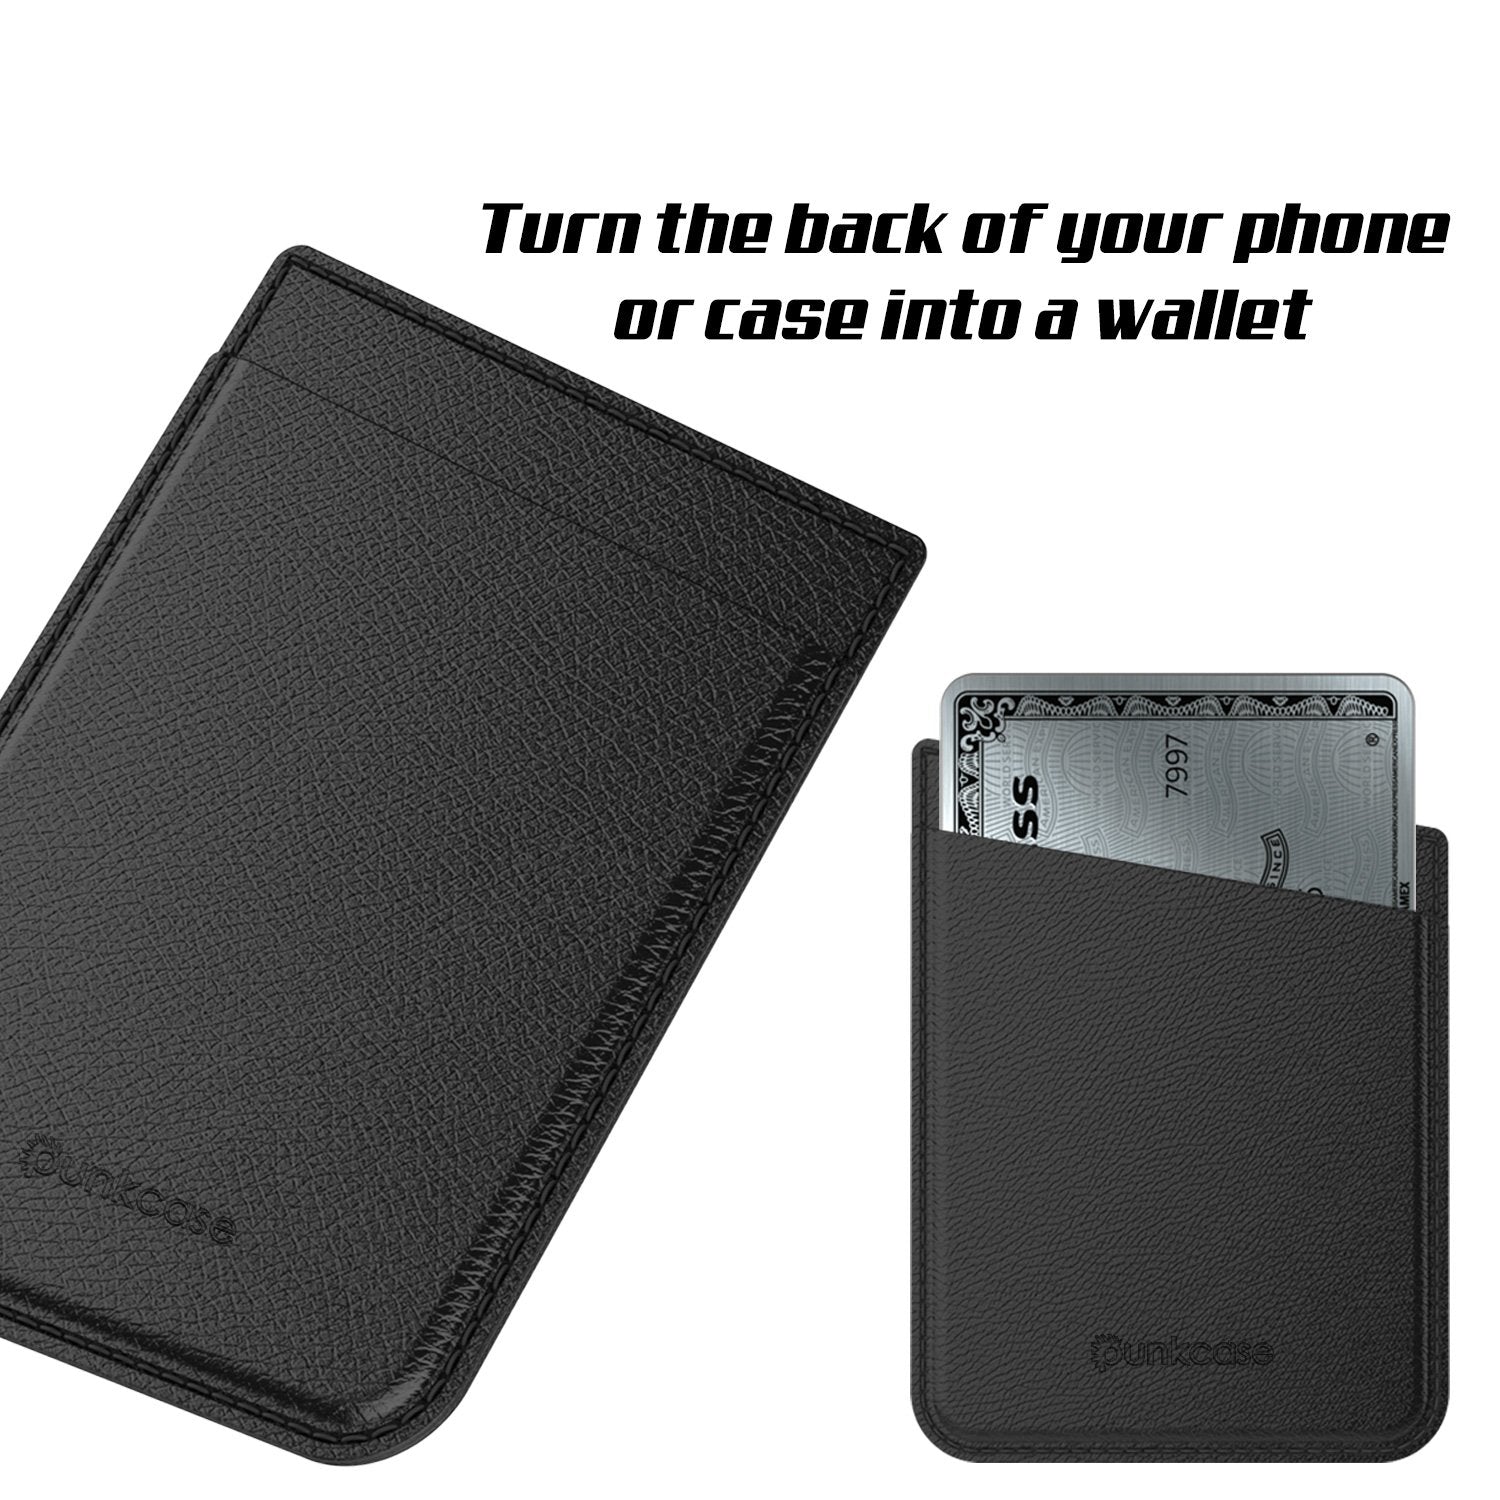 PunkCase CardStud Deluxe Stick On Wallet | Adhesive Card Holder Attachment for Back of iPhone, Android & More | Leather Pouch | [Black]